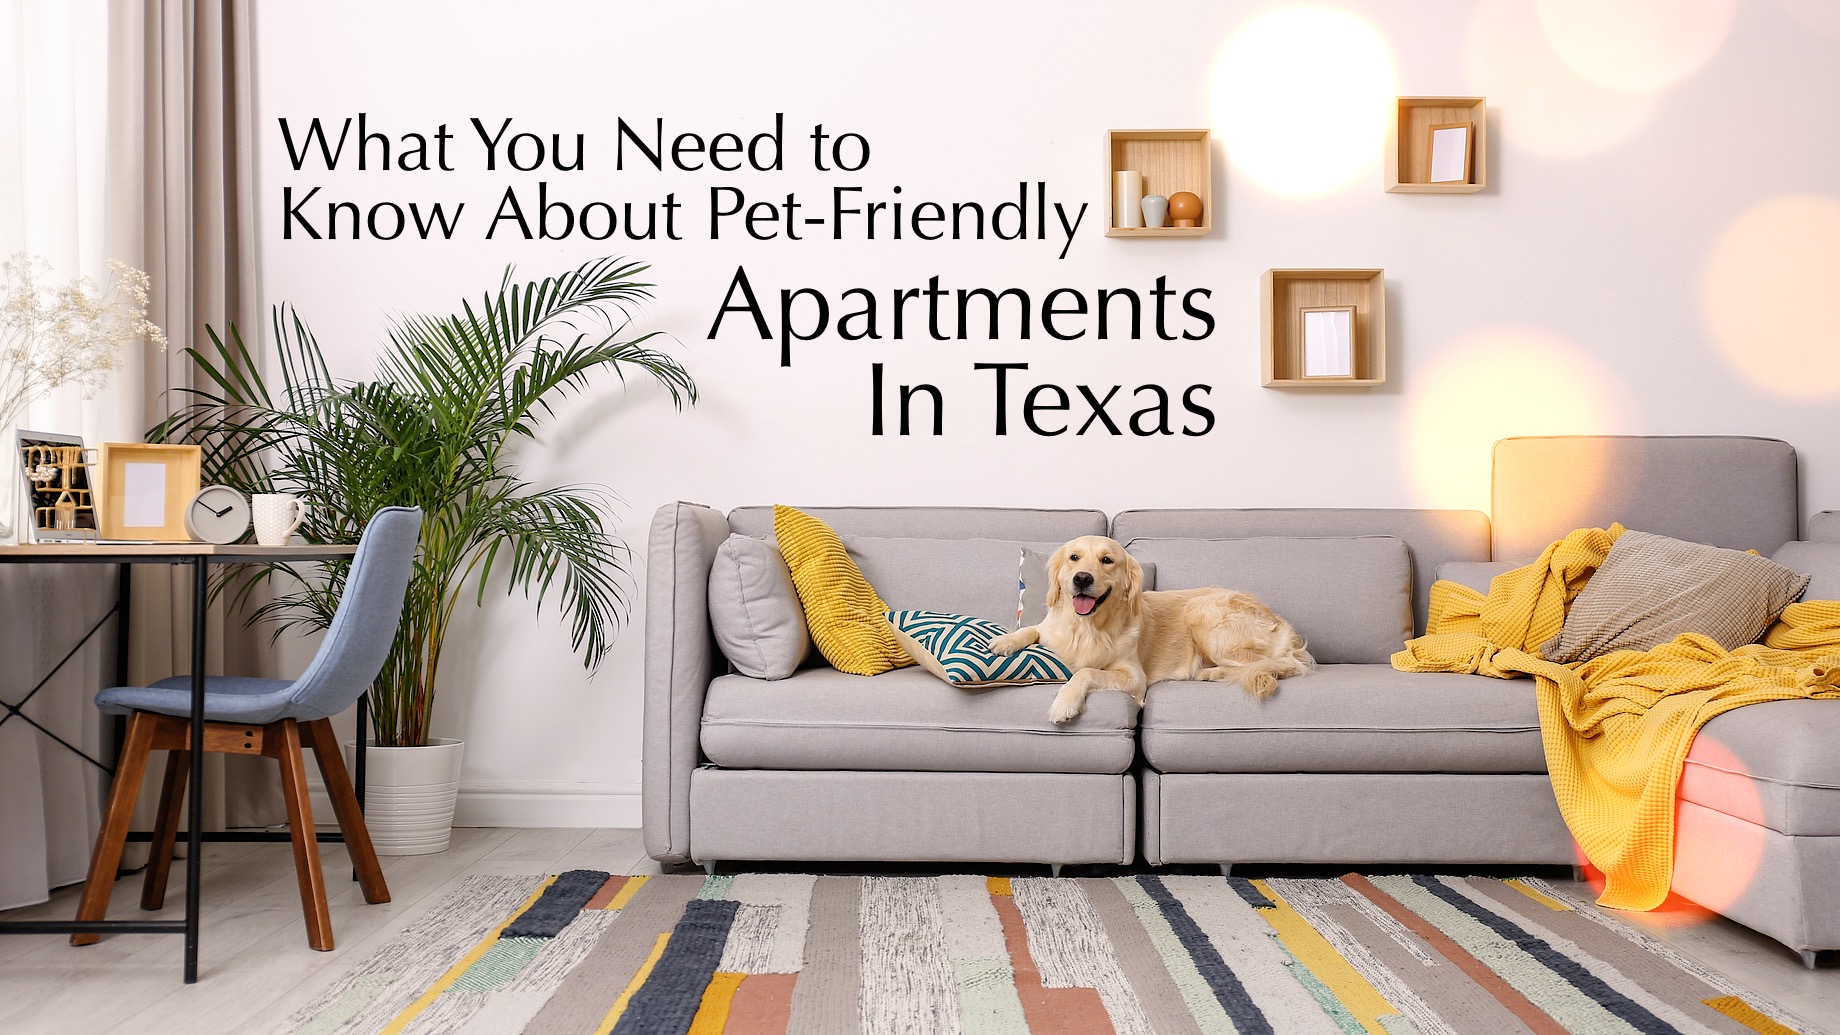 What You Need to Know About Pet-Friendly Apartments in Texas